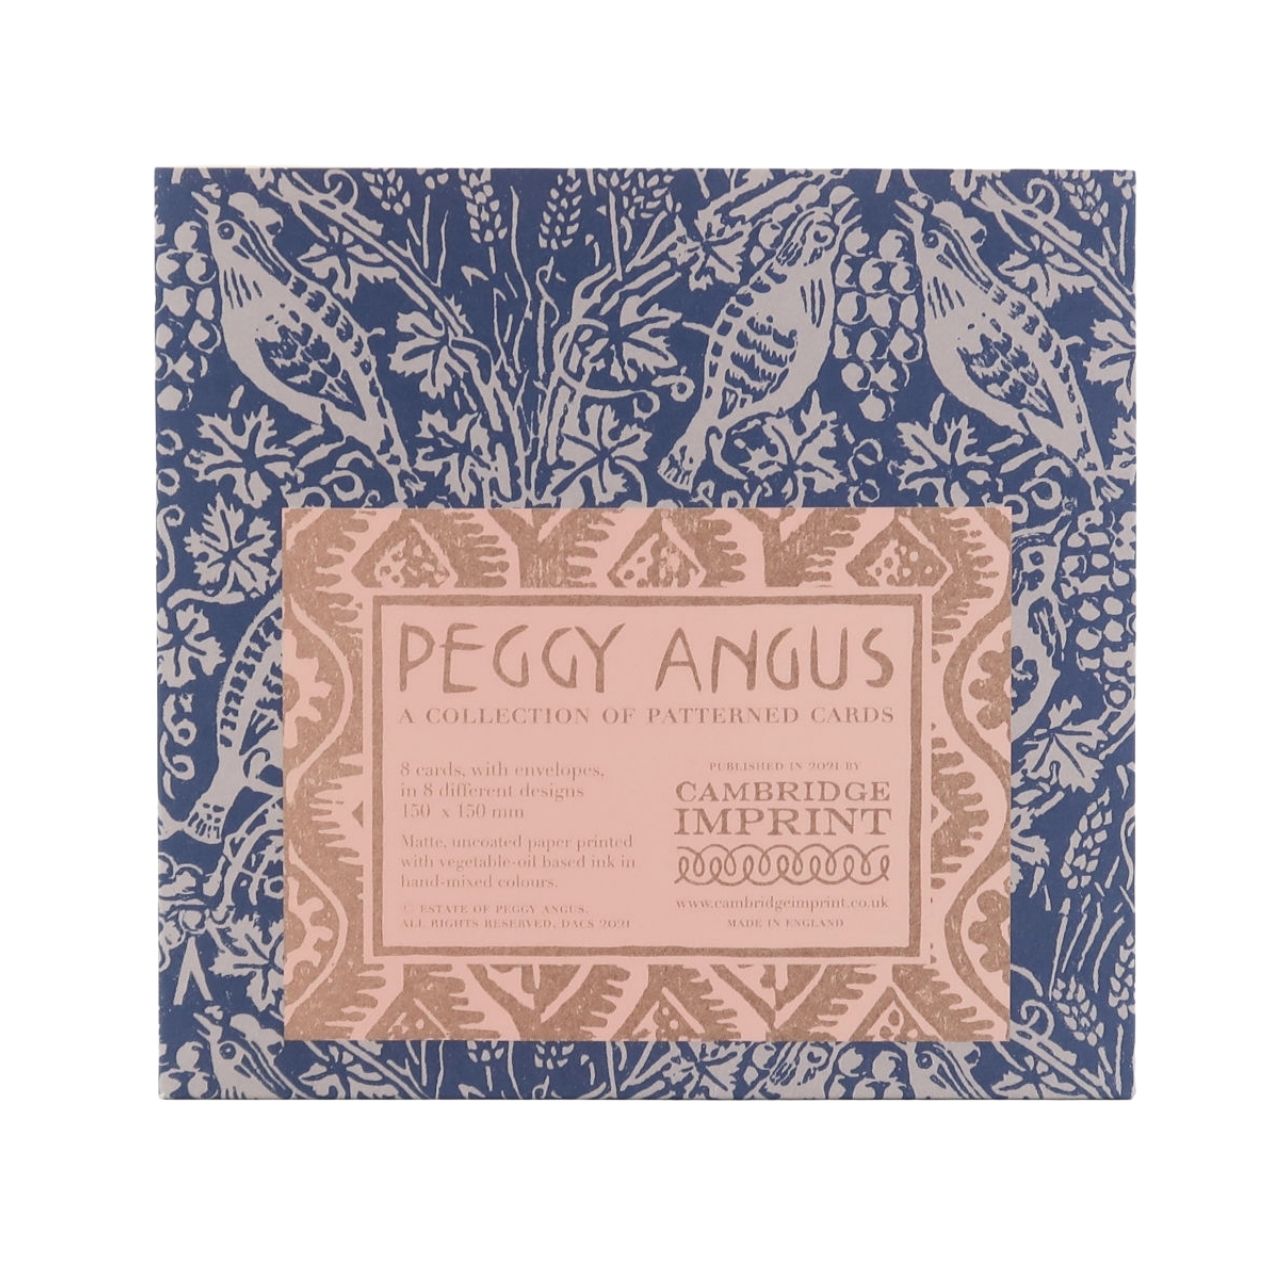 Cambridge Imprint Set of 8 Patterned Cards by Peggy Angus